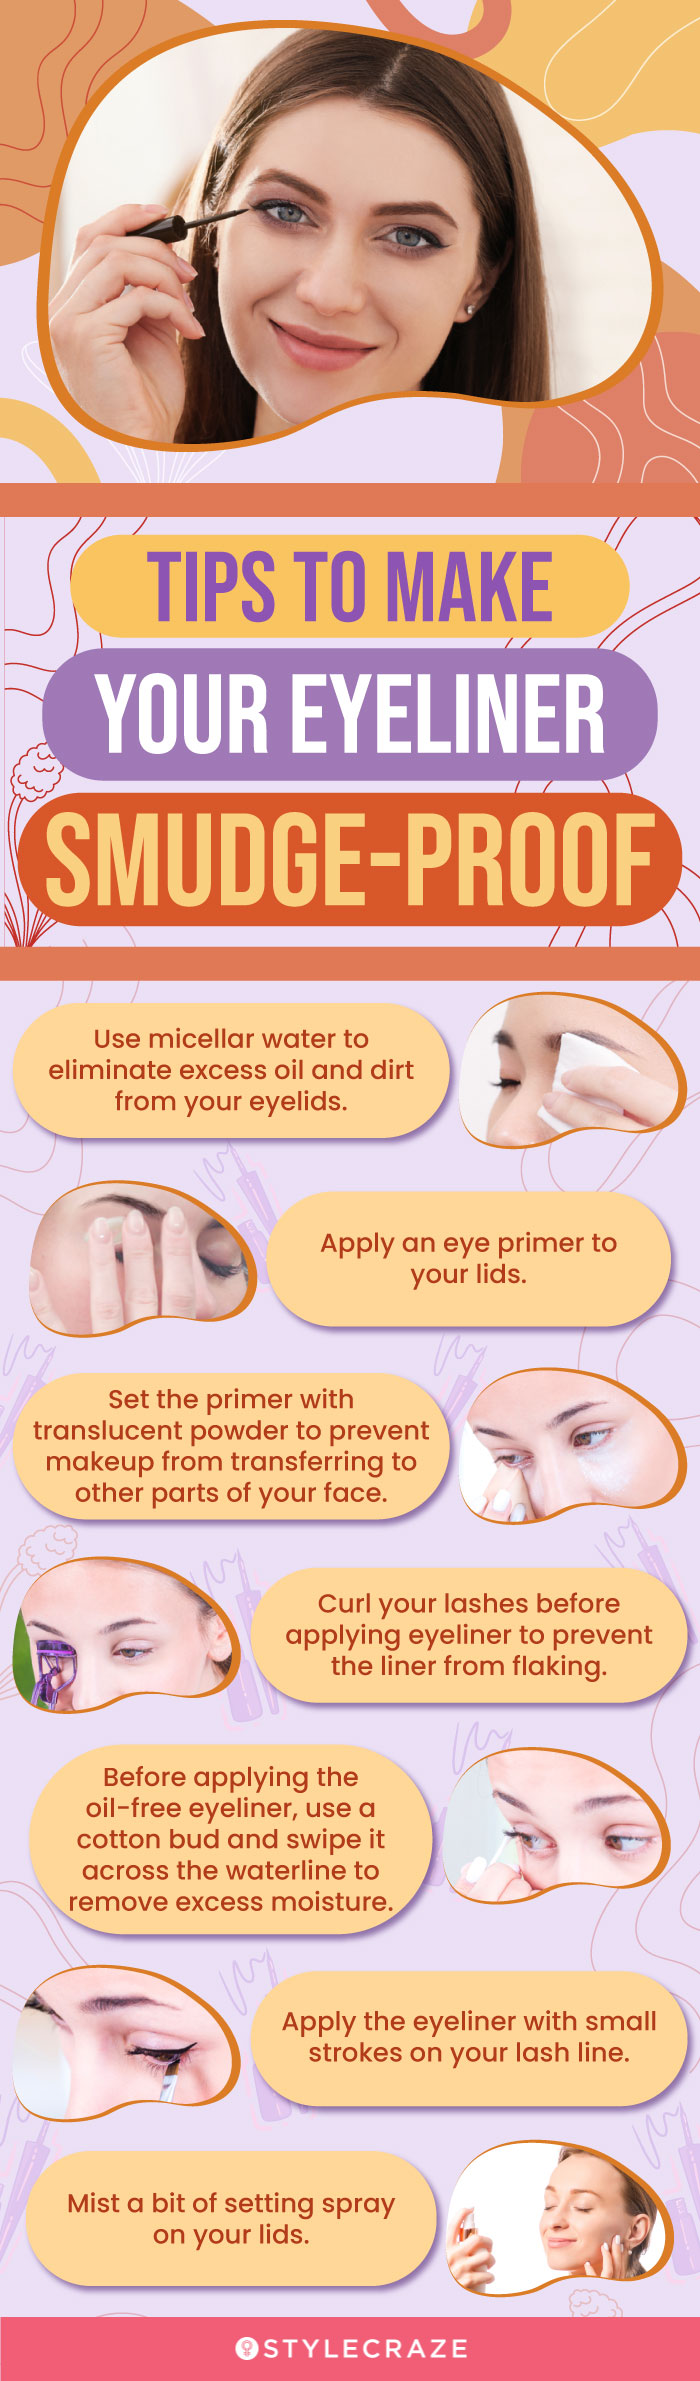 Tips To Make Your Eyeliner Smudge-Proof (infographic)